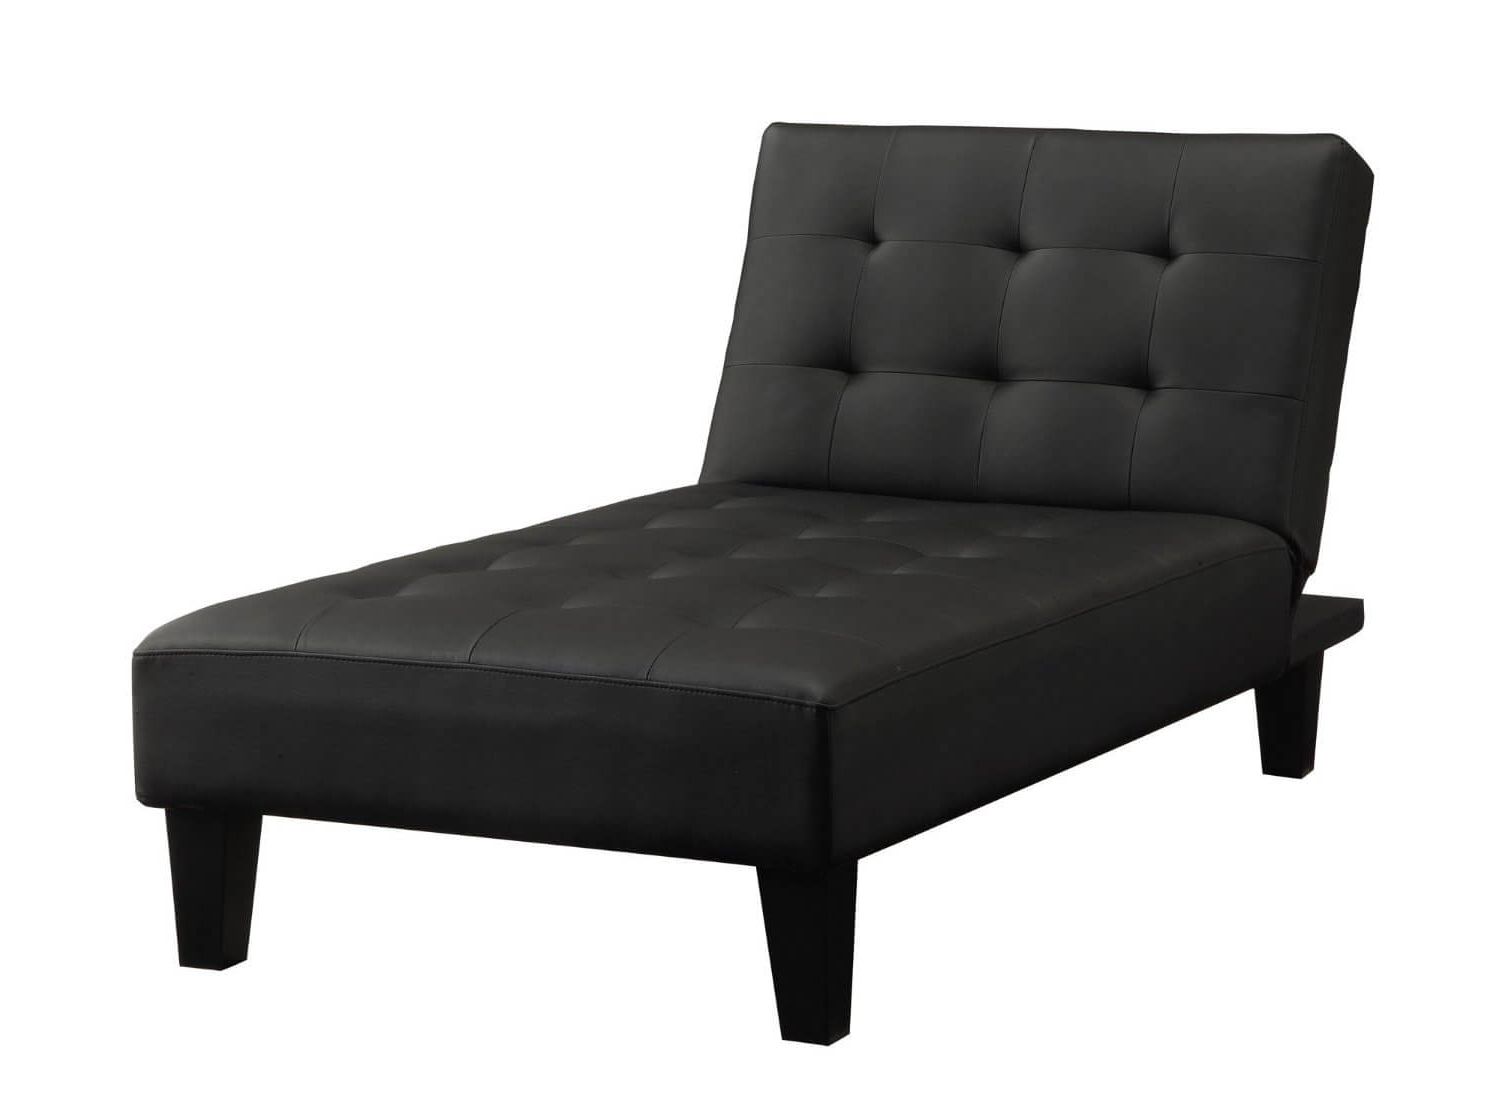 Black Chaise Lounges Within Latest Top 20 Types Of Black Chaise Lounges (buying Guide) – (Photo 4 of 15)